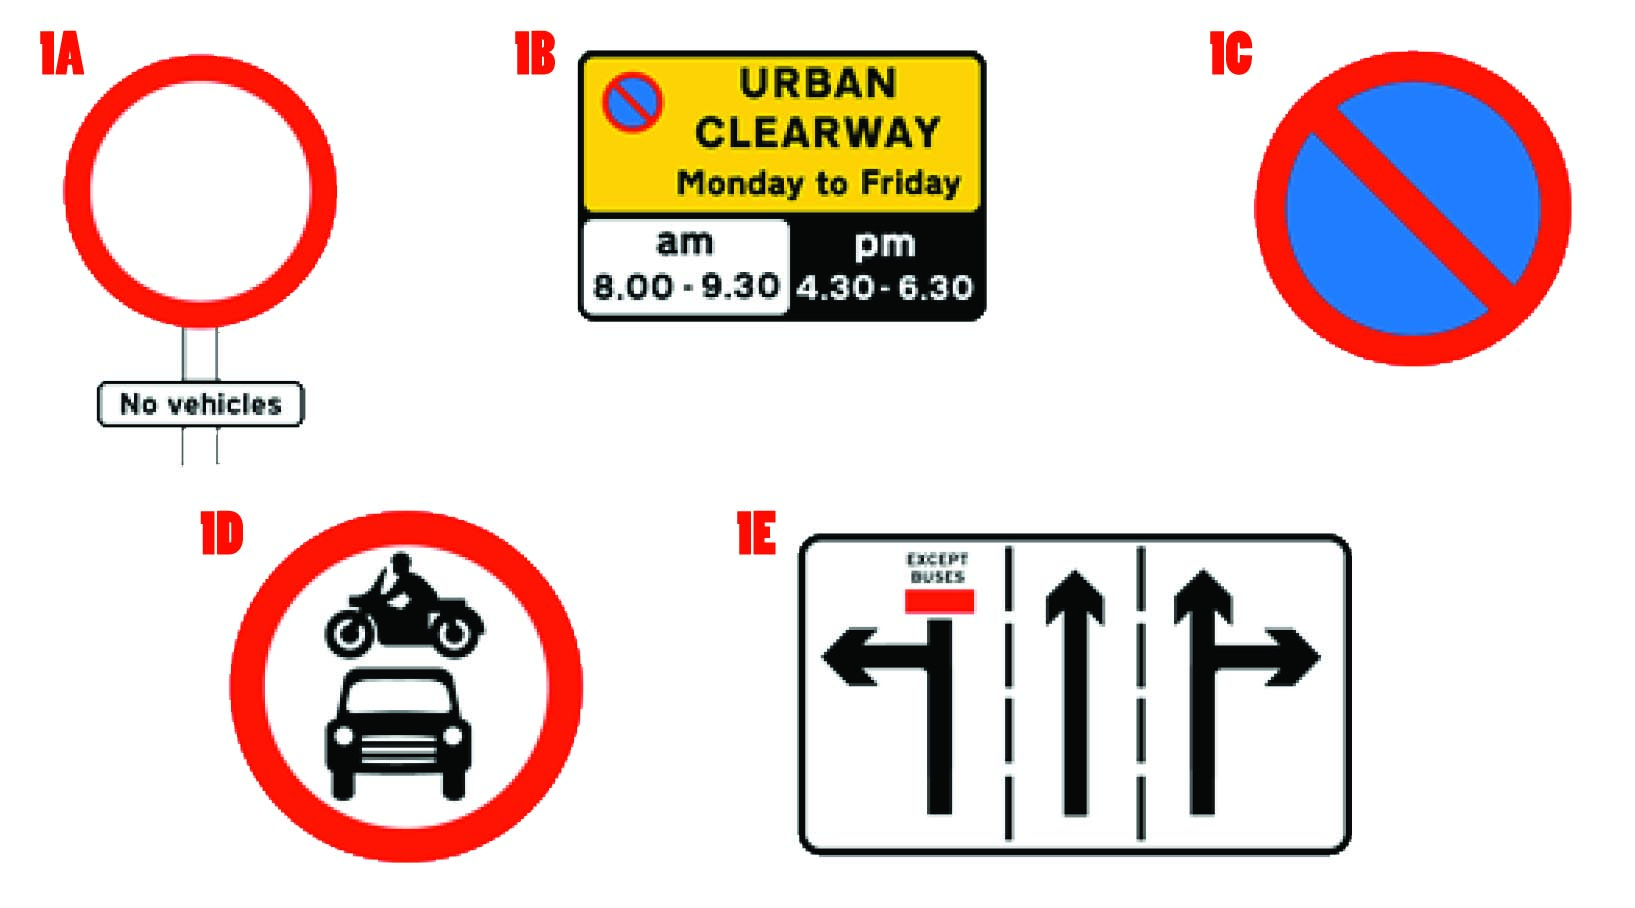 Confused.com about road signs? / Meon Blog | Meon